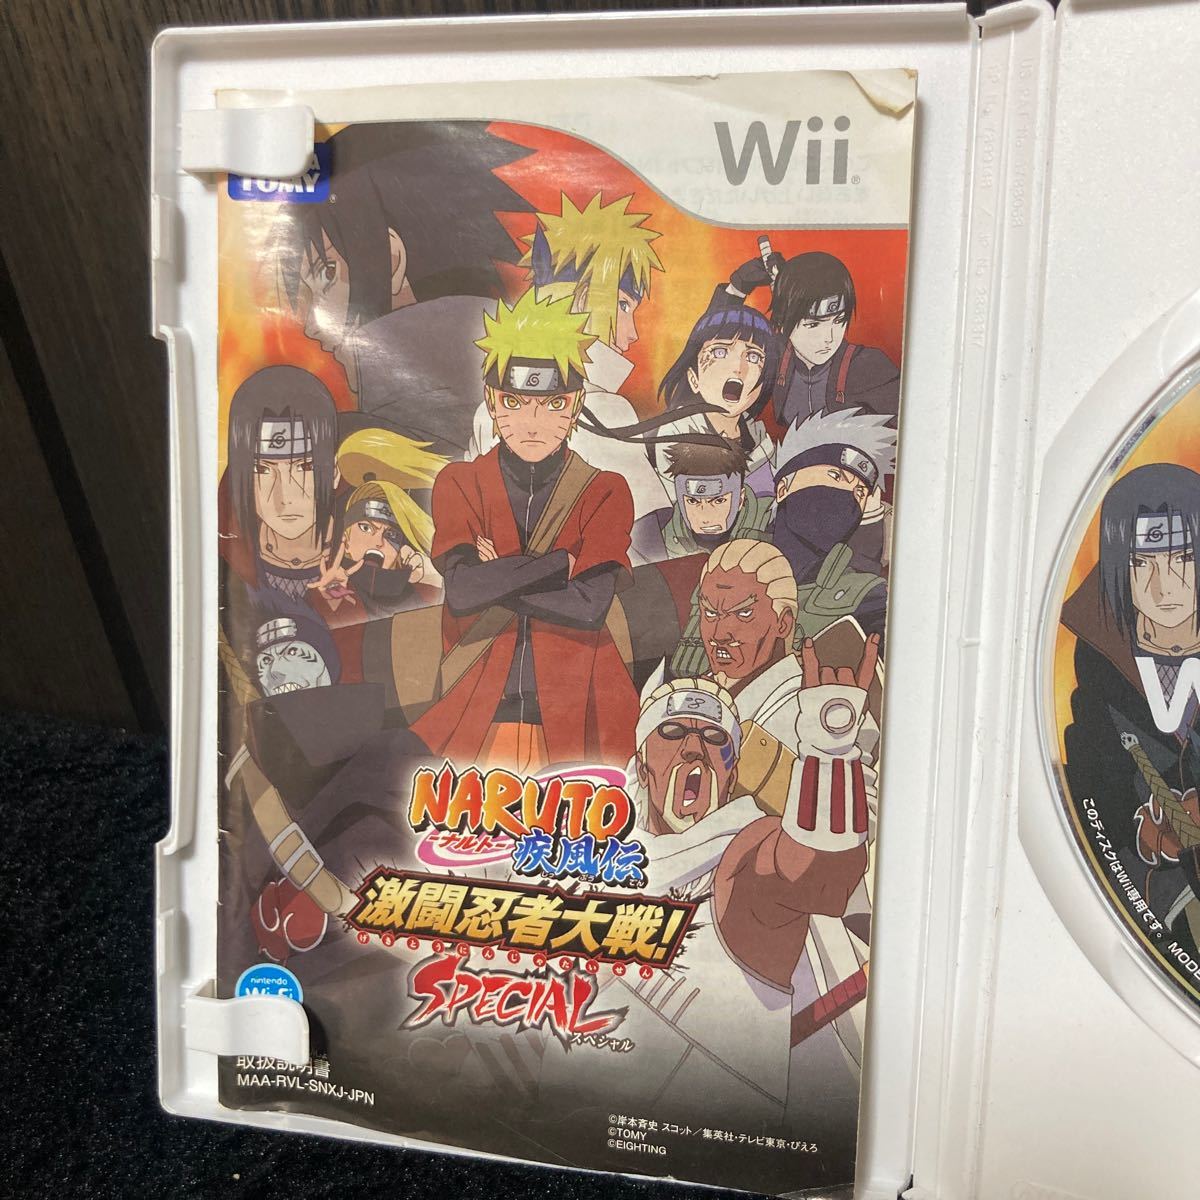 Wiiソフト Wii ナルト　NARUTO 疾風伝 激闘忍者大戦  SPECIAL